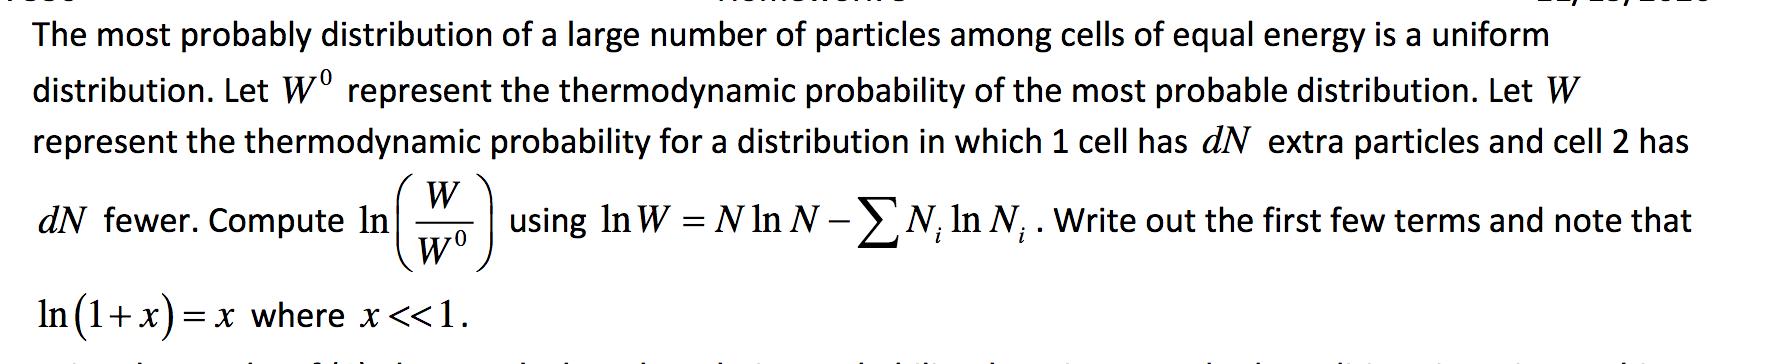 The most probably distribution of a large number of particles among cells of equal energy is a uniform